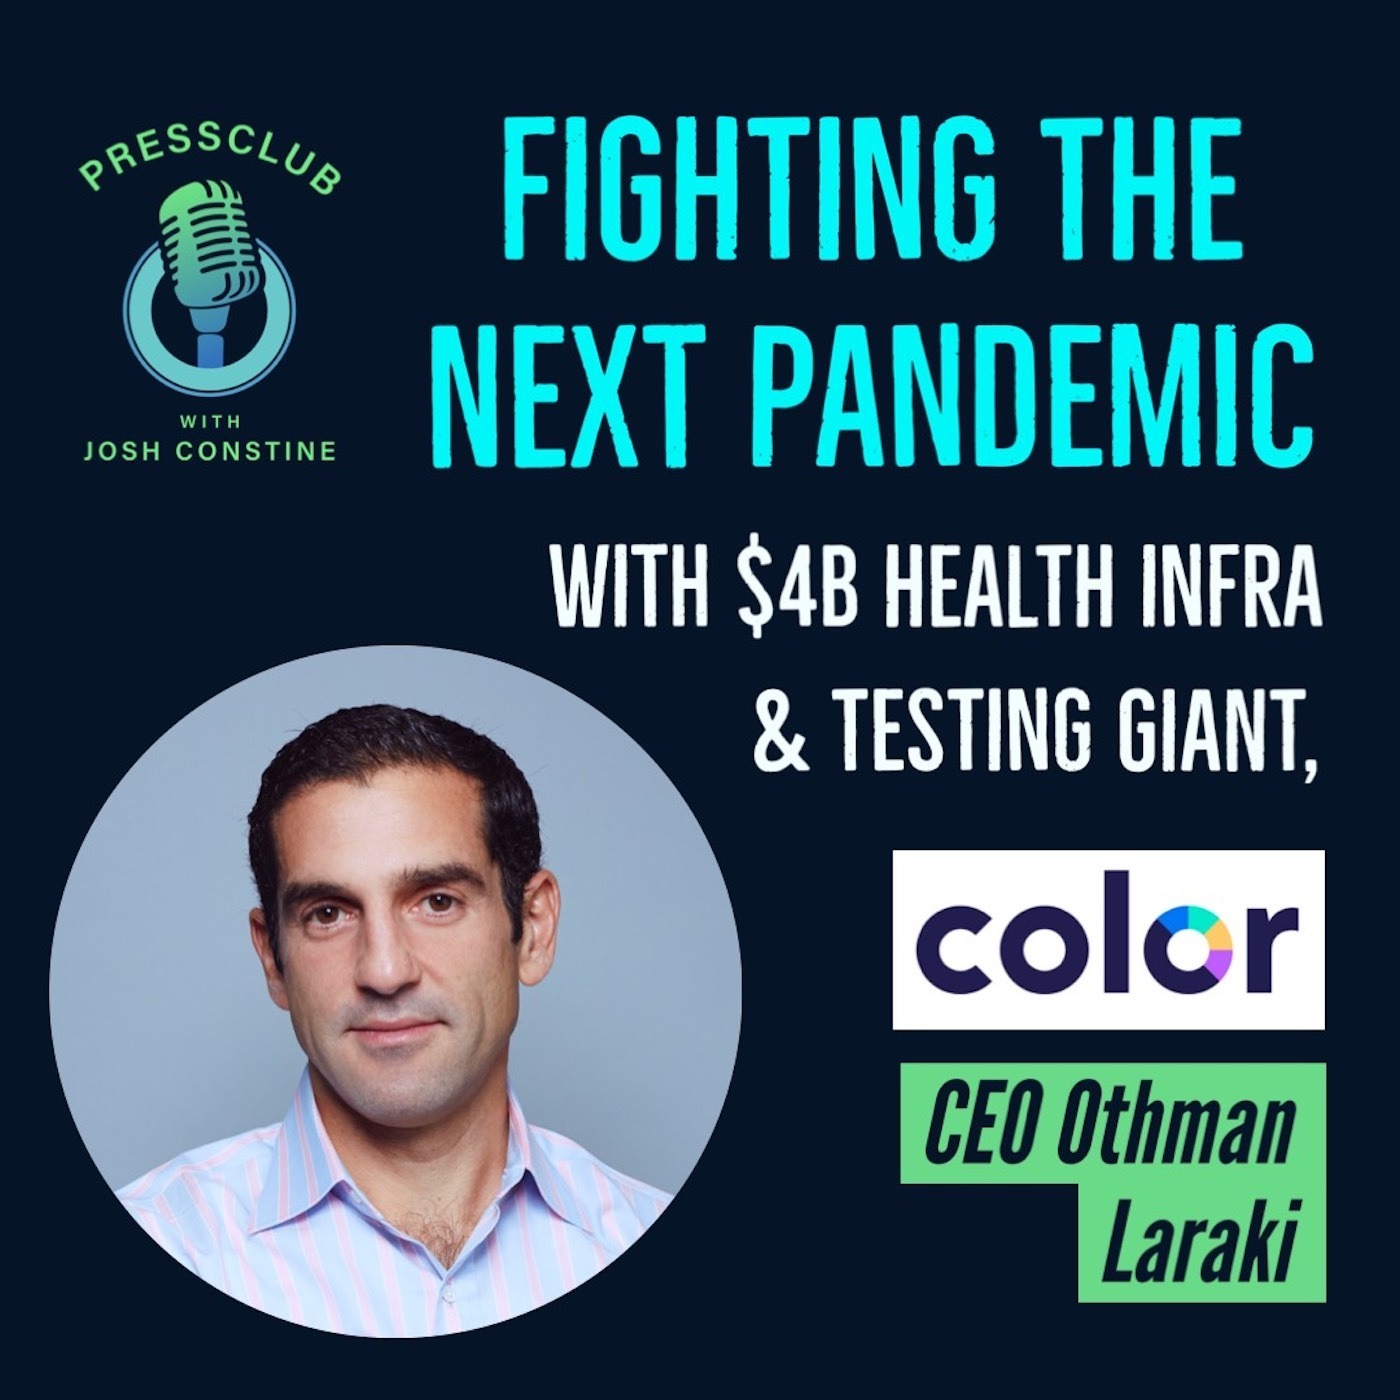 Fighting The Next Pandemic with healthtech giant Color's CEO Othman Laraki